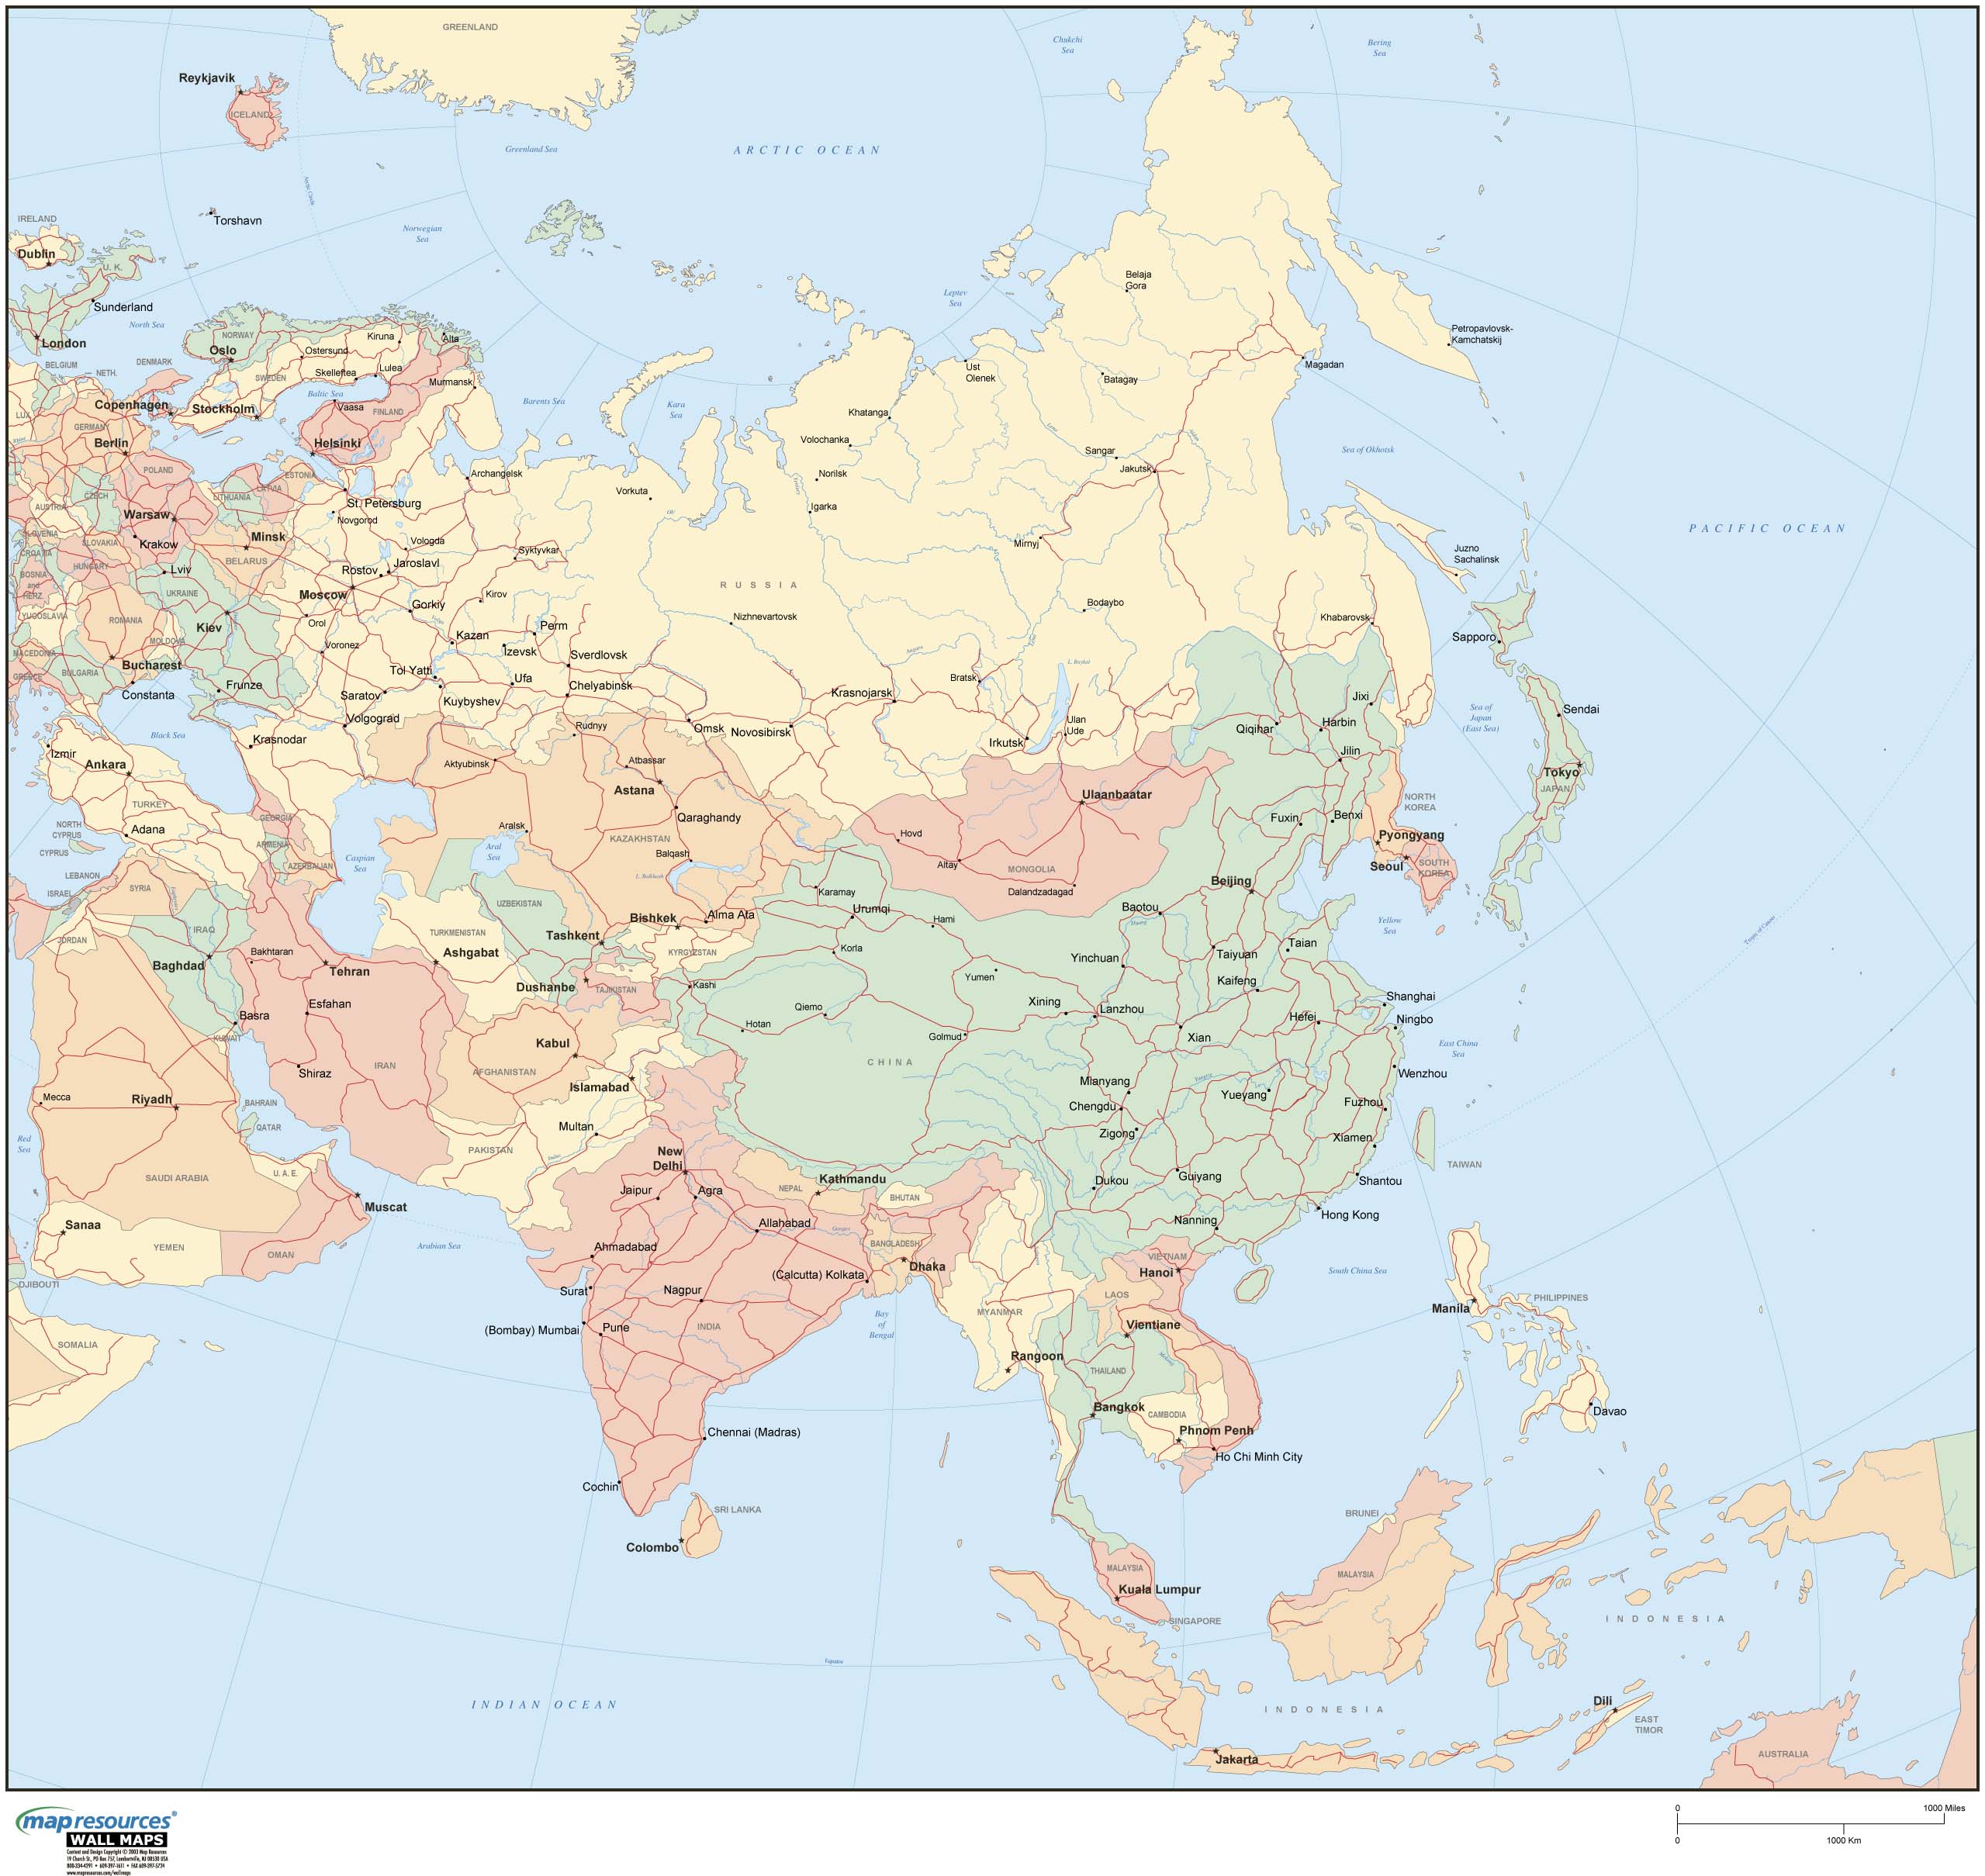 Asia Wall Map by Map Resources - MapSales